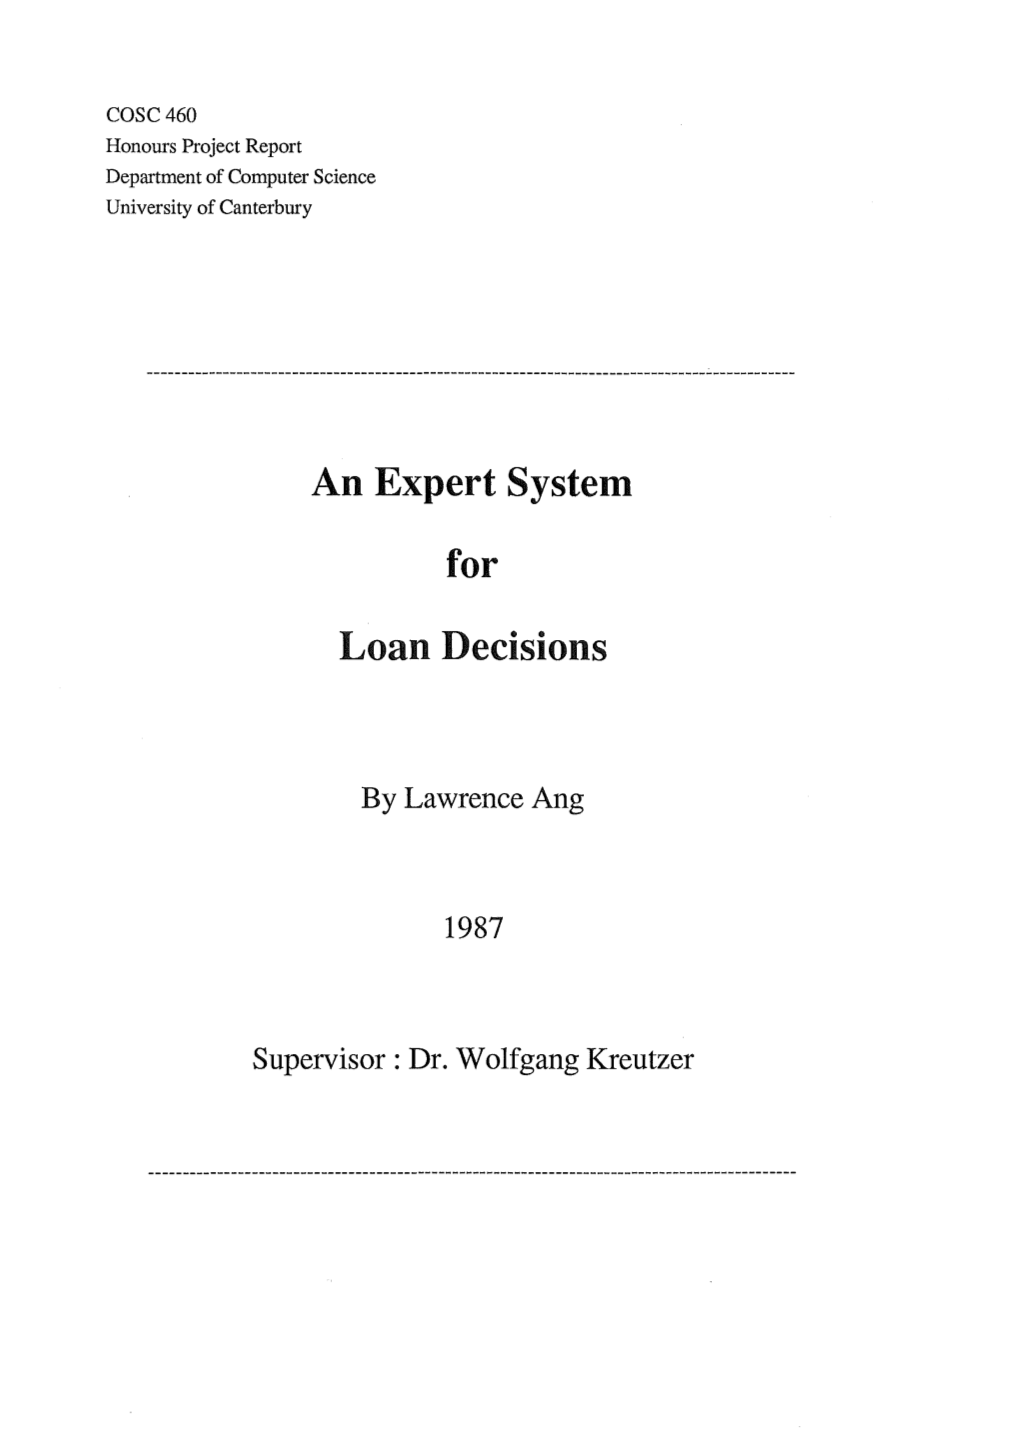 An Expert System for Loan Decisions